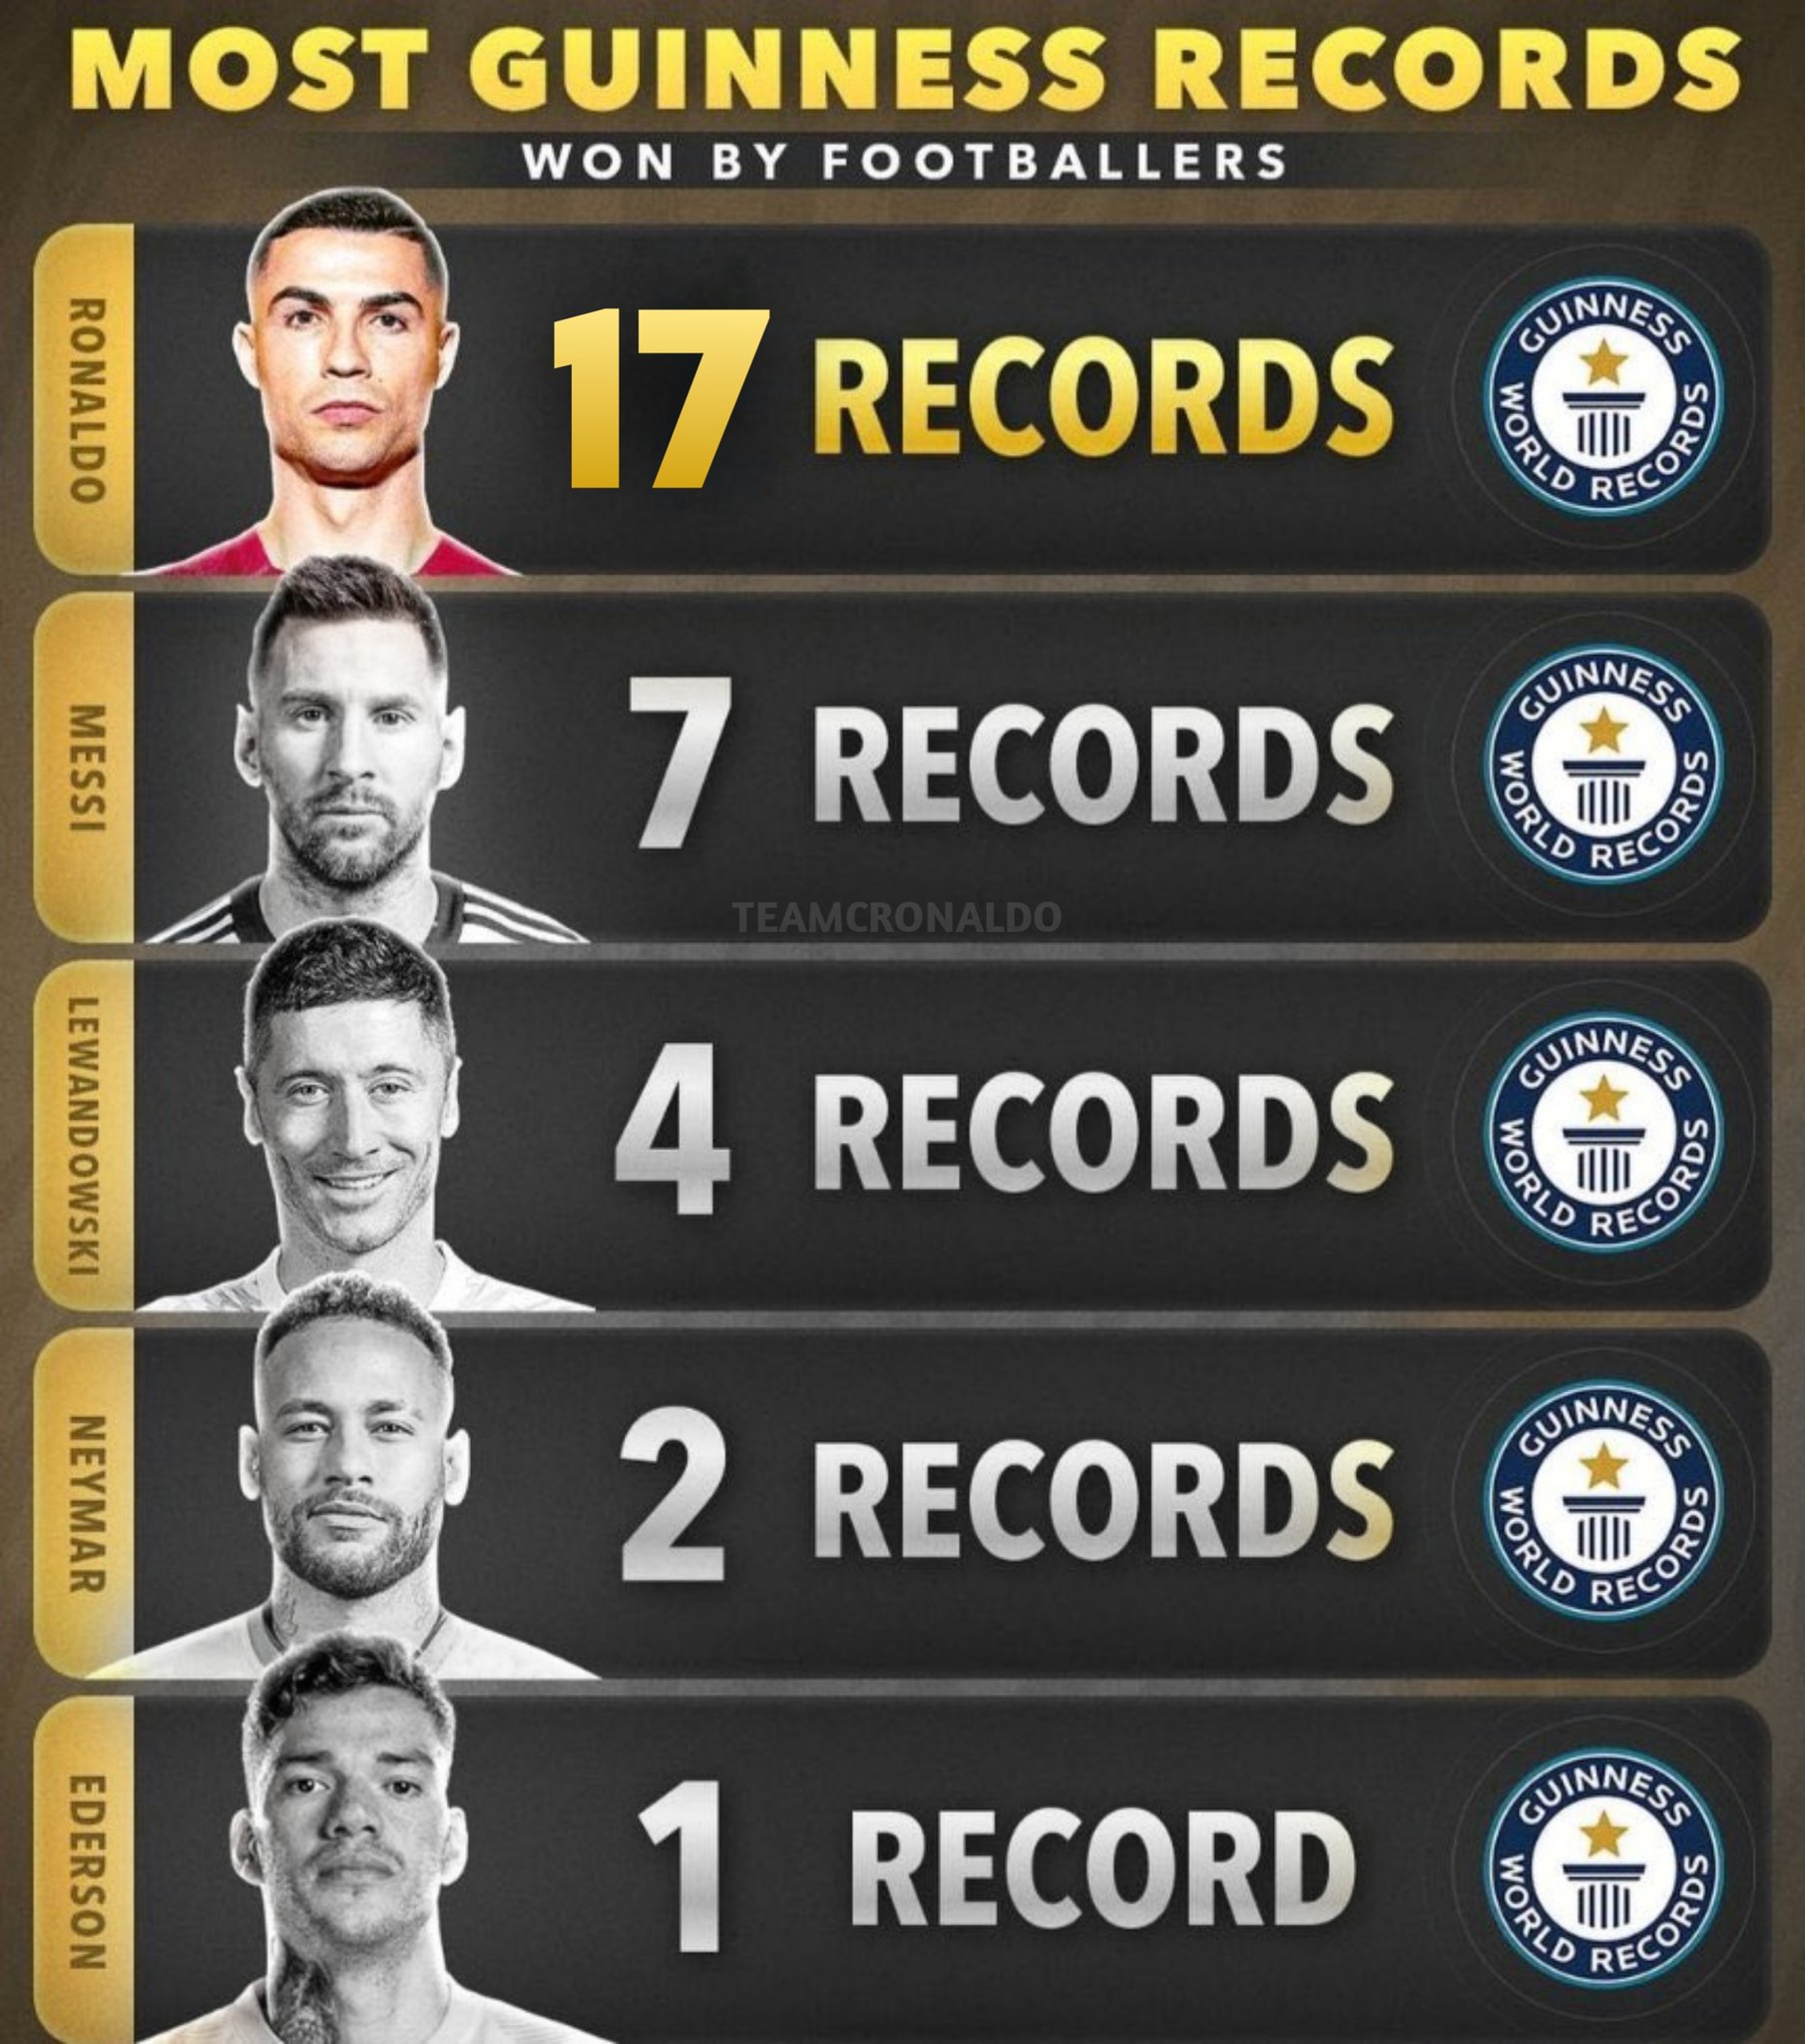 TCR. on Twitter: "Cristiano Ronaldo tops the list of Most Guinness Records  won by Footballers. “I don't chase records, records chase me.” 🇵🇹🐐  https://t.co/vUHDx204f4" / Twitter